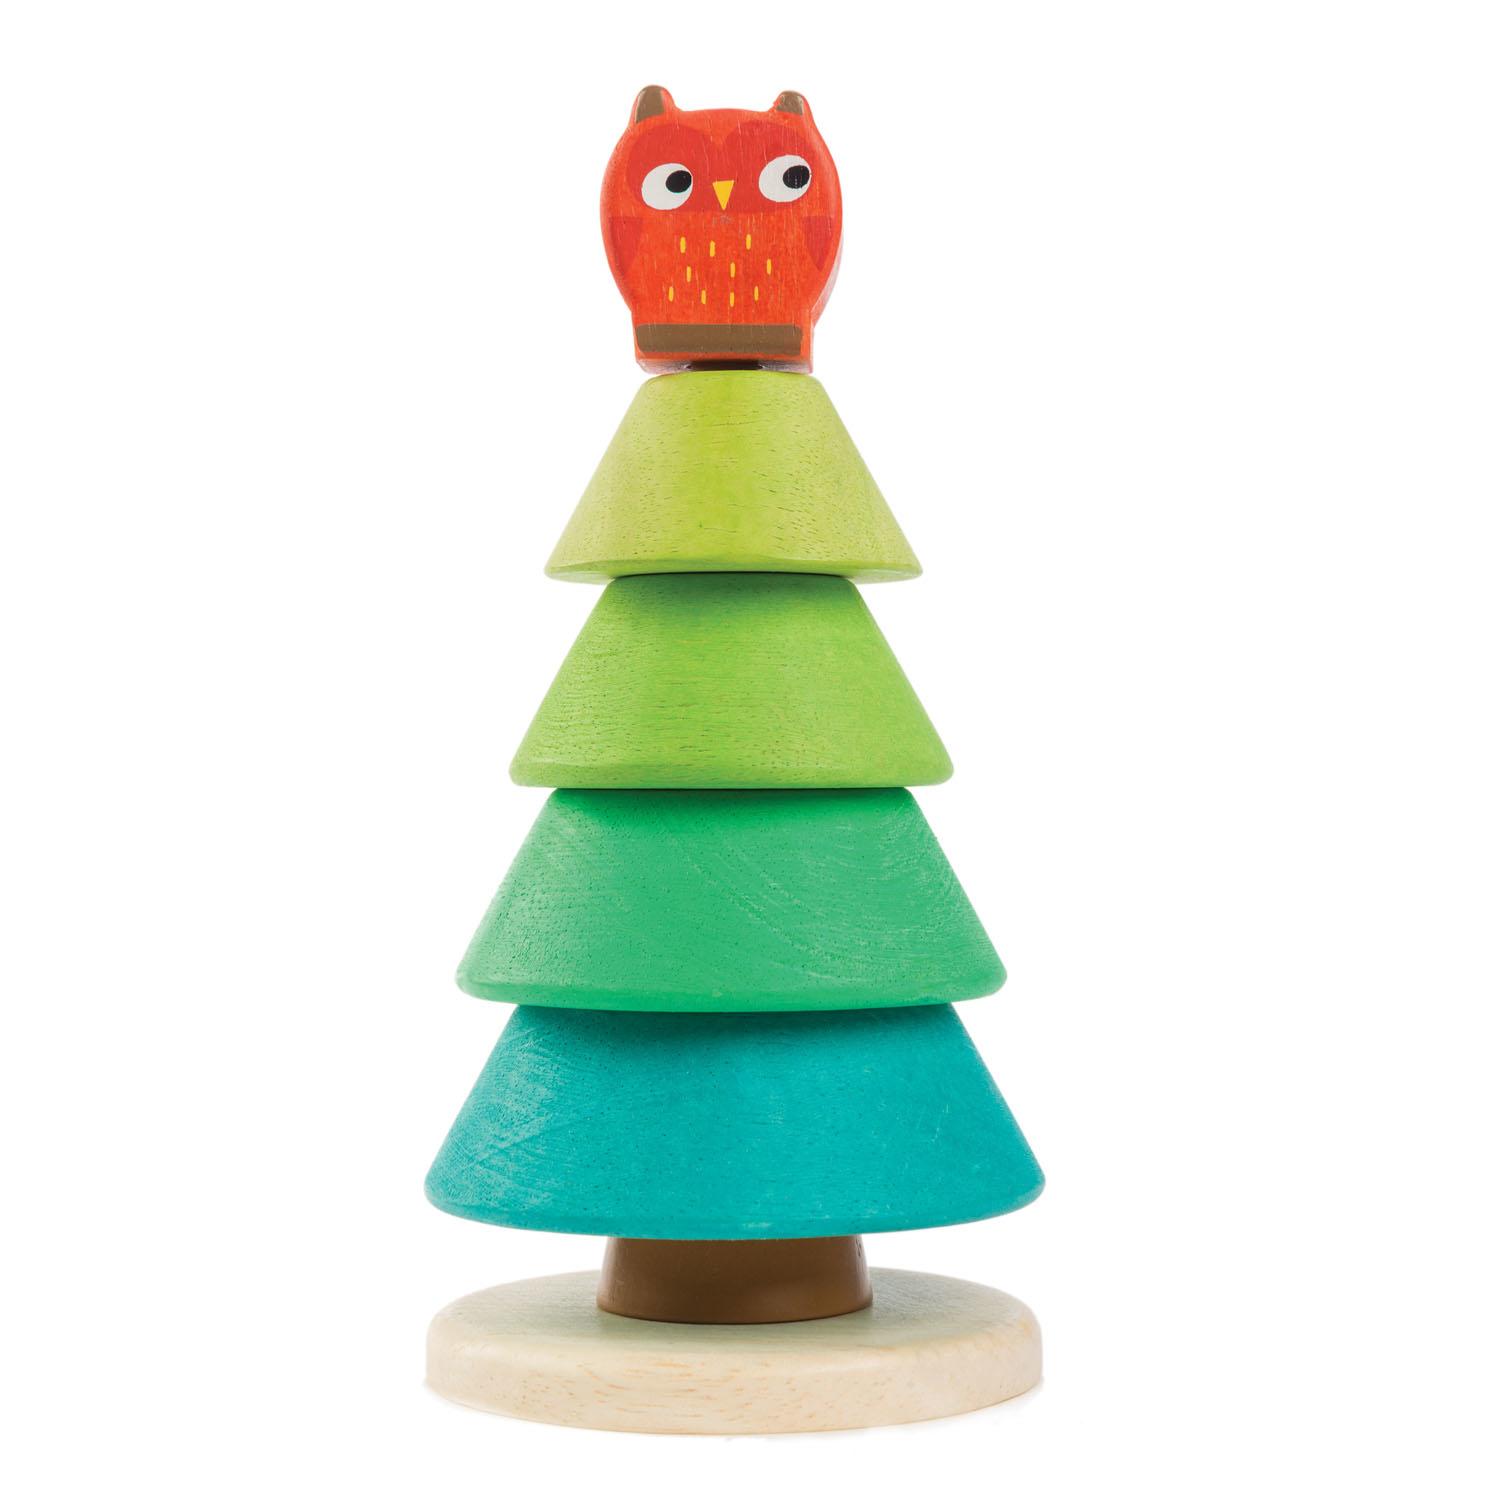 New Wooden Toy Stacking Fir Tree Topped with a Red Owl #2